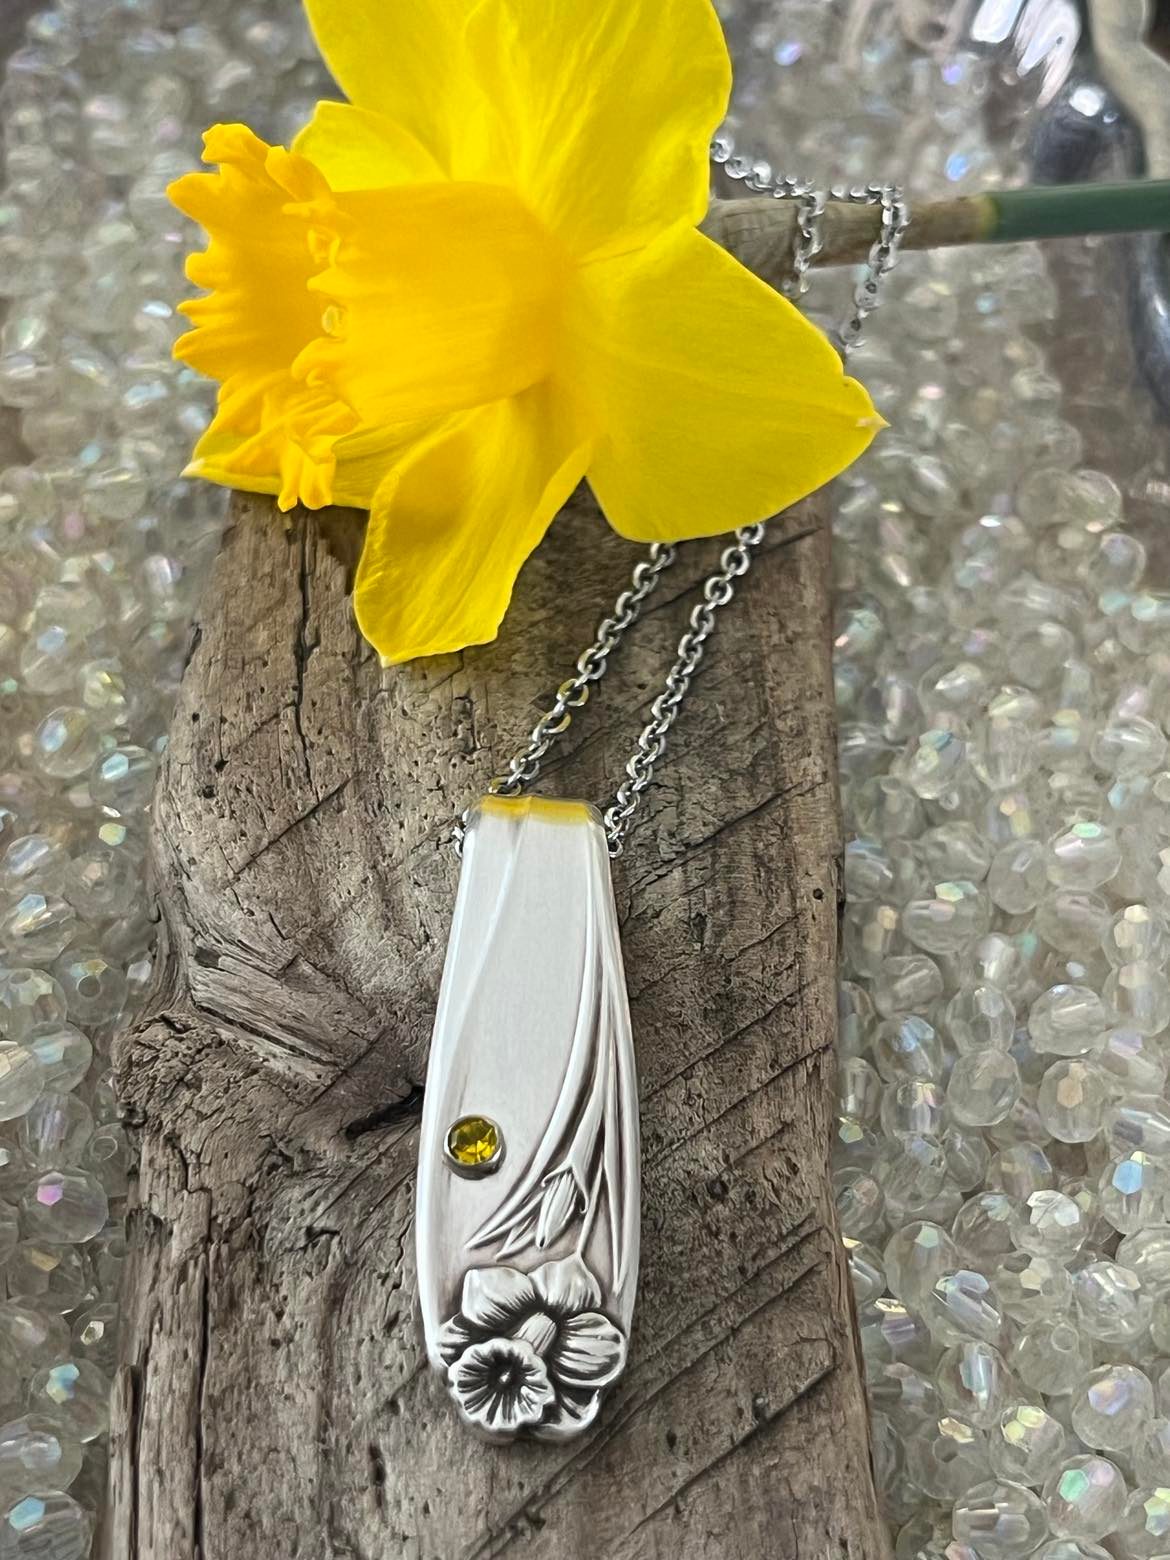 Pendant - Pattern: Daffodil, Vintage 1950 with yellow crystal rivet